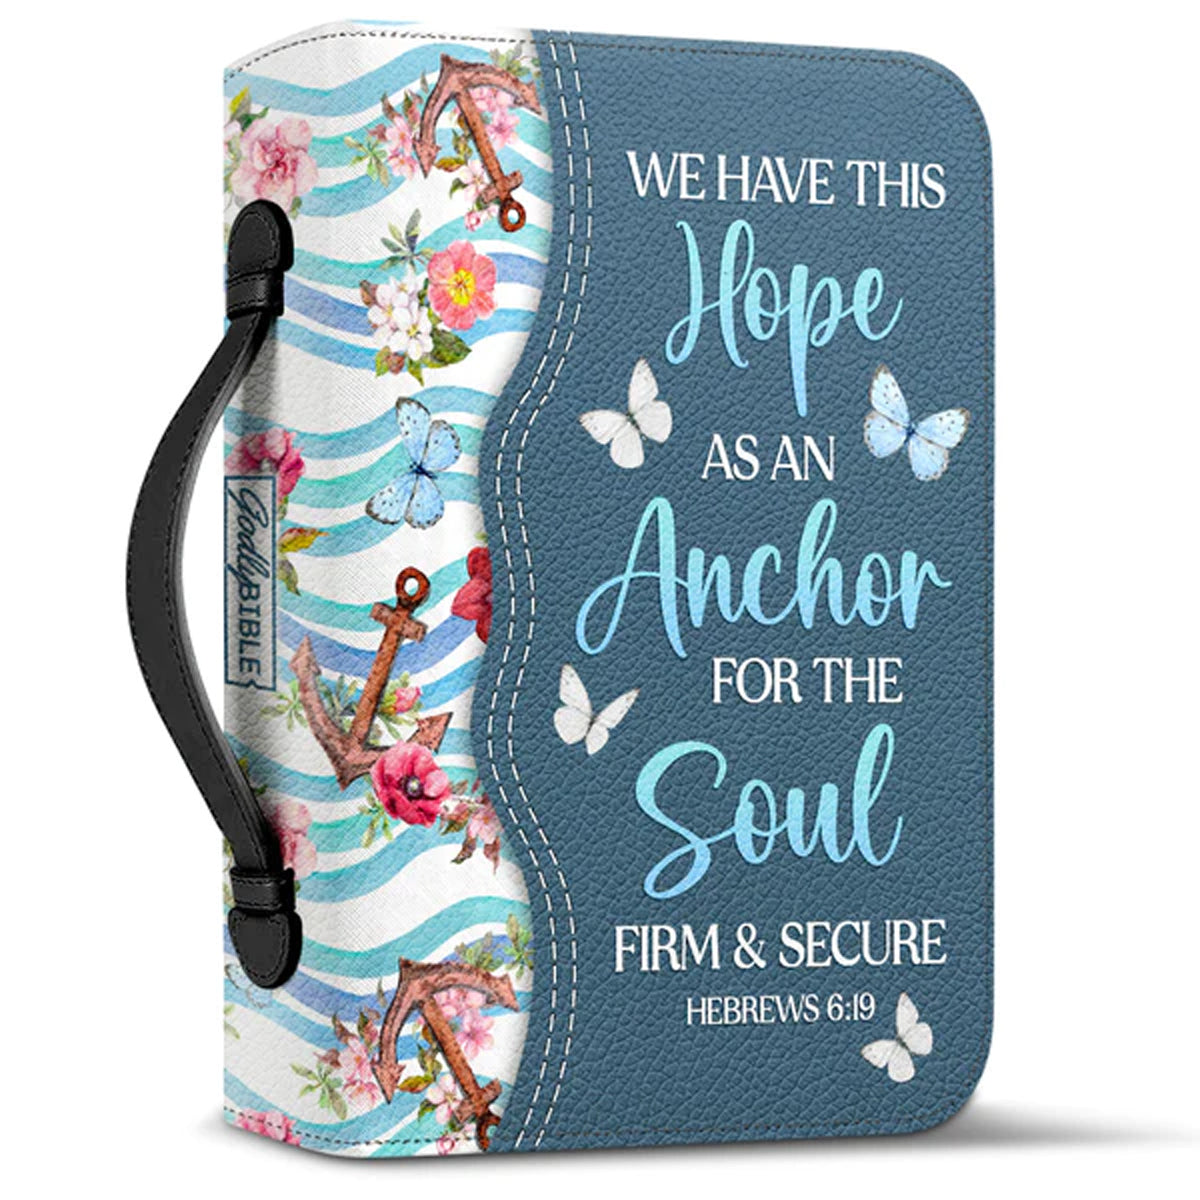 Christianart Bible Cover, We Have This Hope As An Anchor For The Soul Firm And Secure Hebrews 6:19, Christmas Gift, Gifts For Women, Gifts For Men. - Christian Art Bag